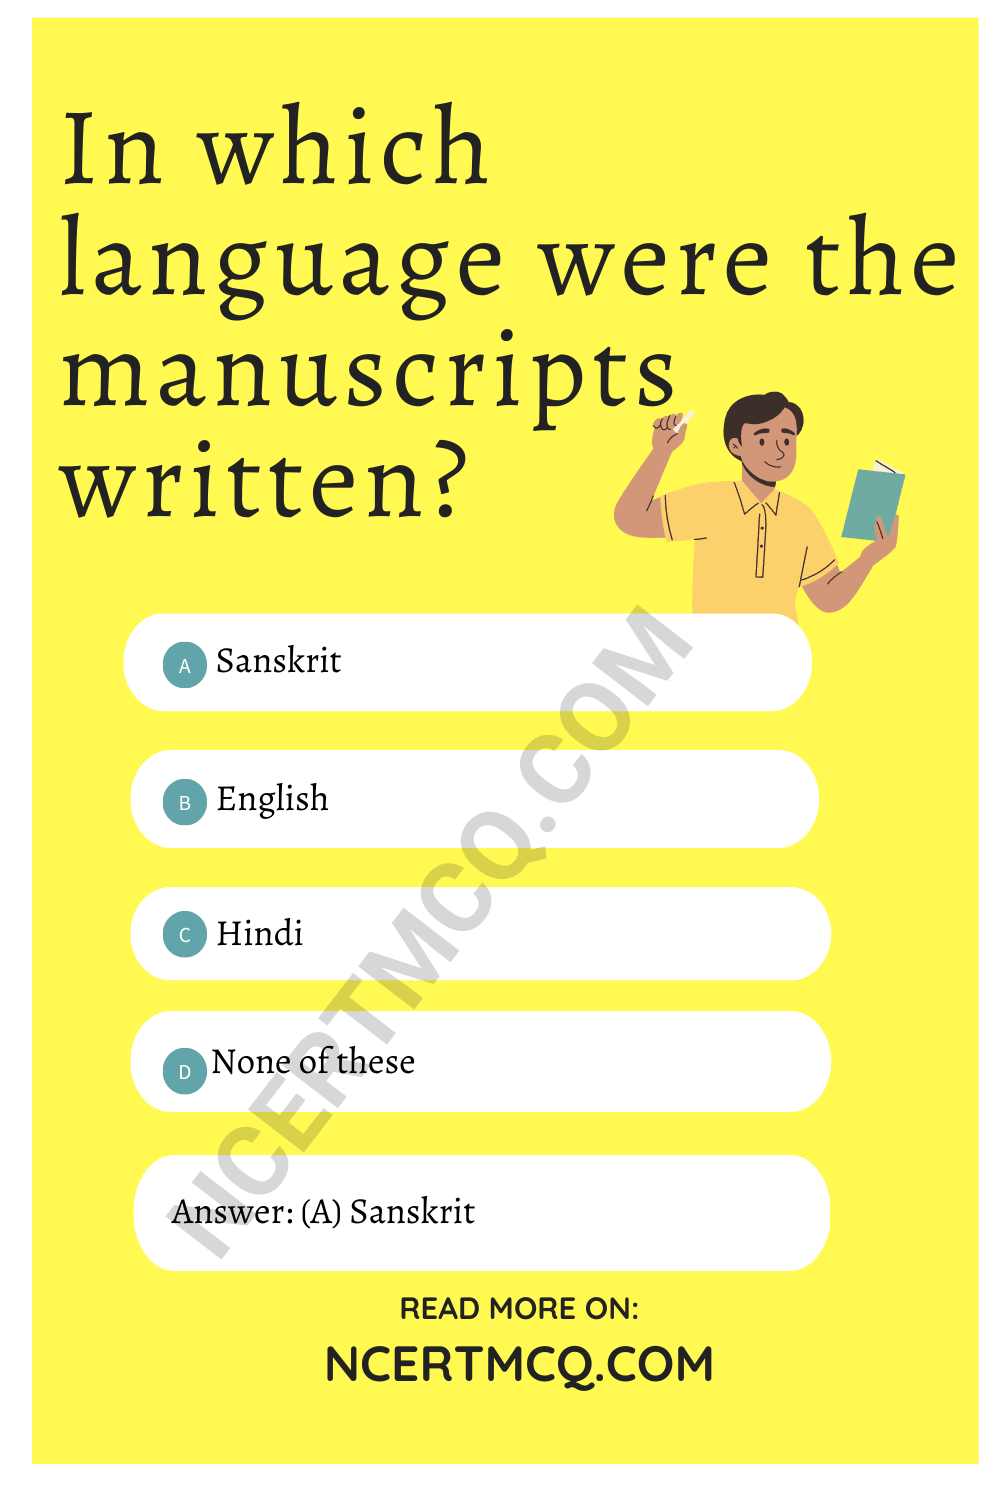 In which language were the manuscripts written?